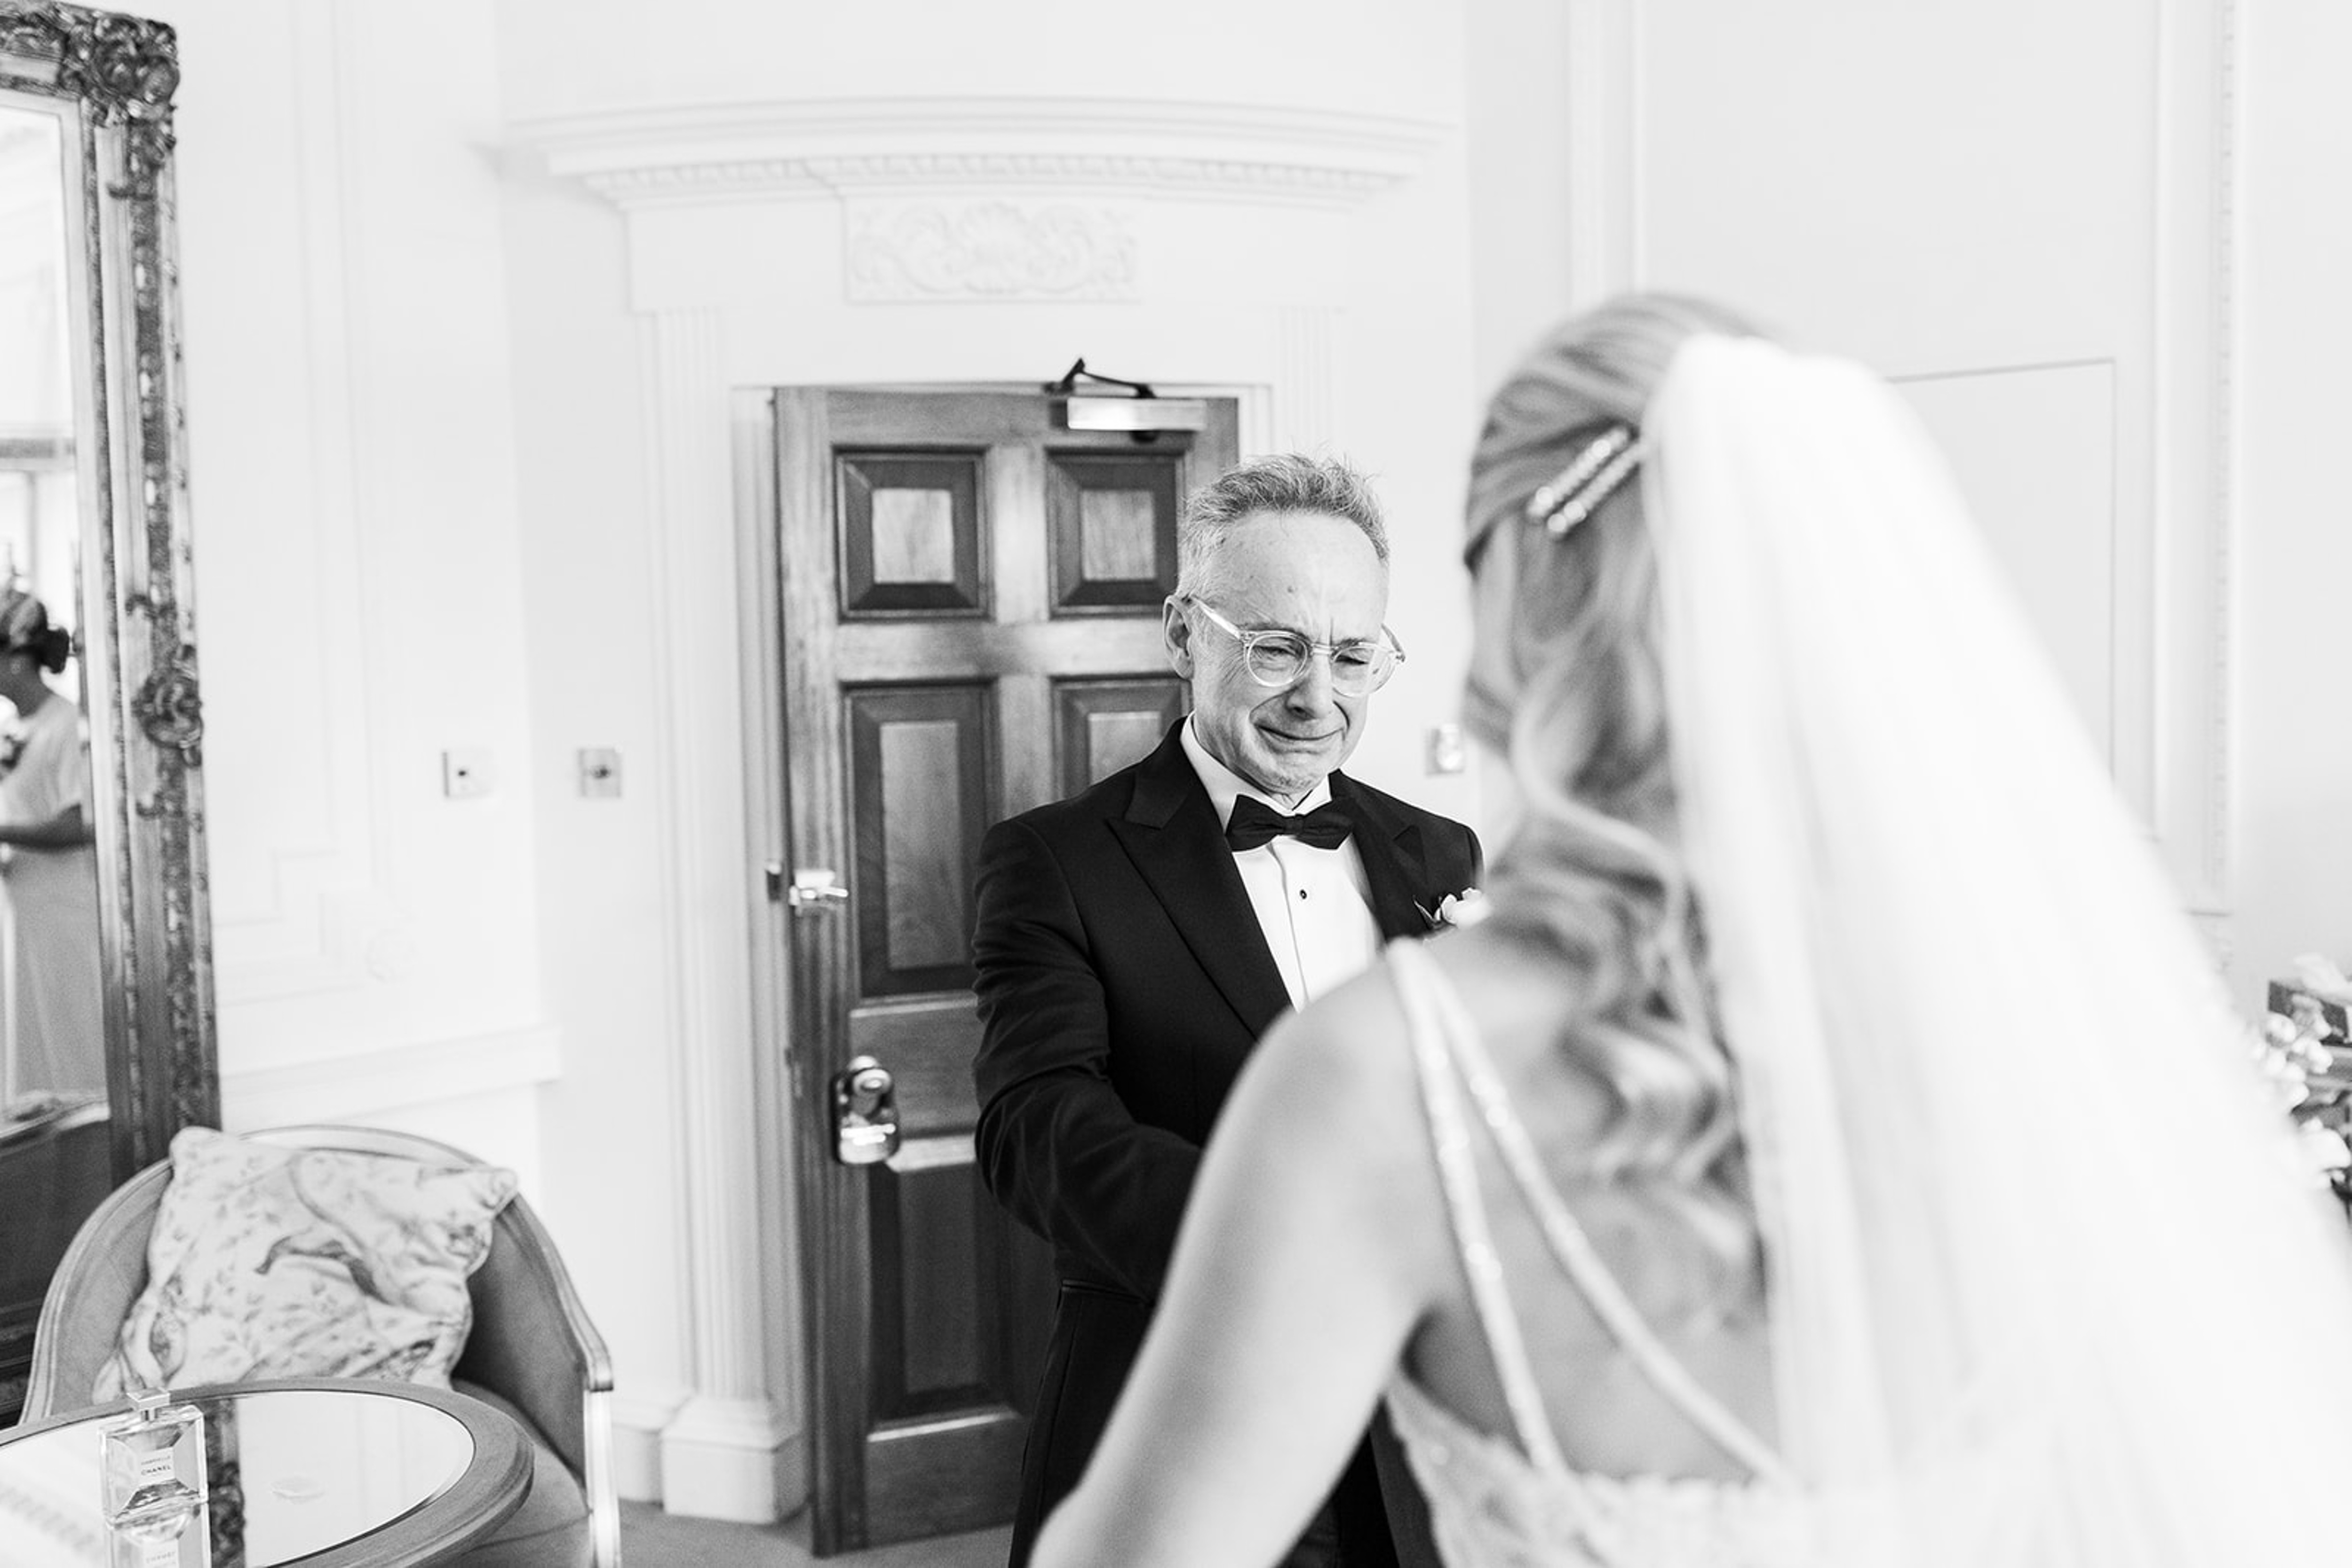 Father of the Bride's first look. Father's reaction to seeing the Bride for the first time. Documentary UK Wedding Photographer. Aimee Joy Photography.